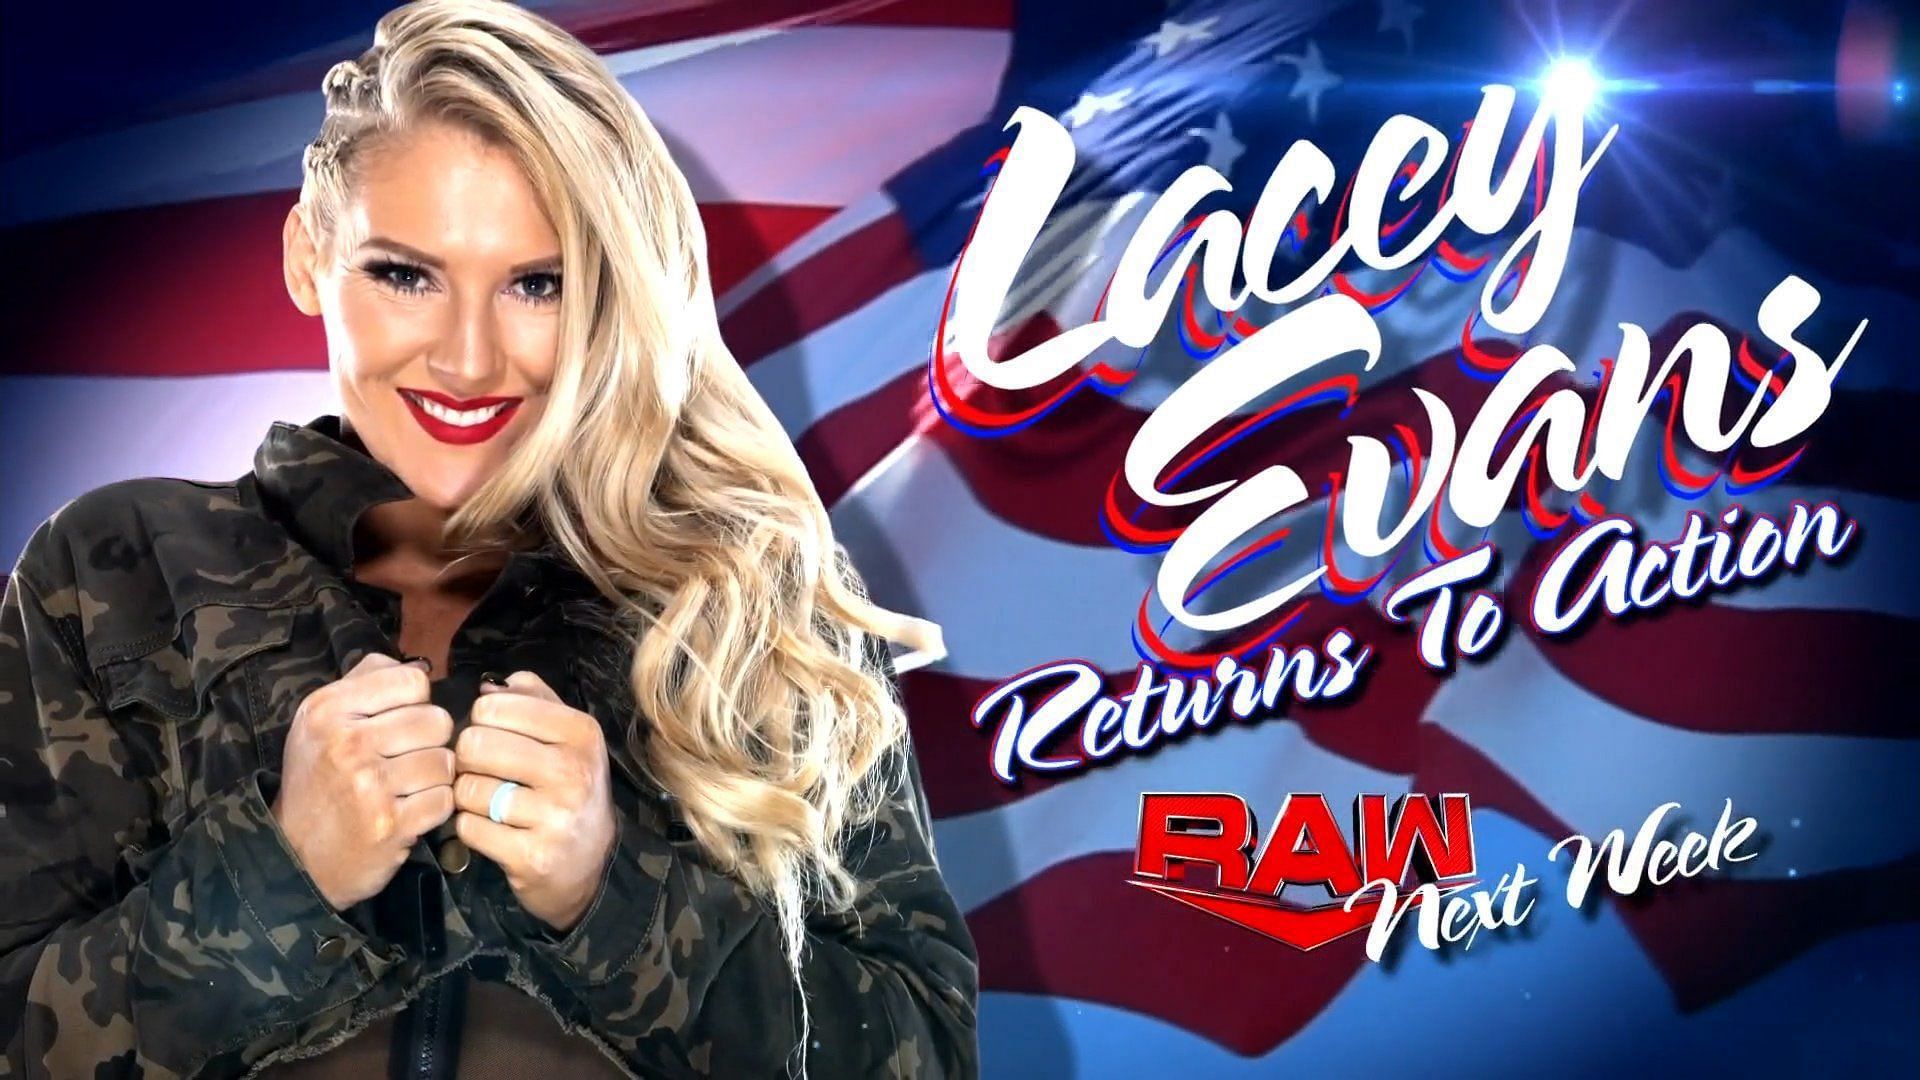 Lacey Evans was advertised to compete on this week&#039;s show